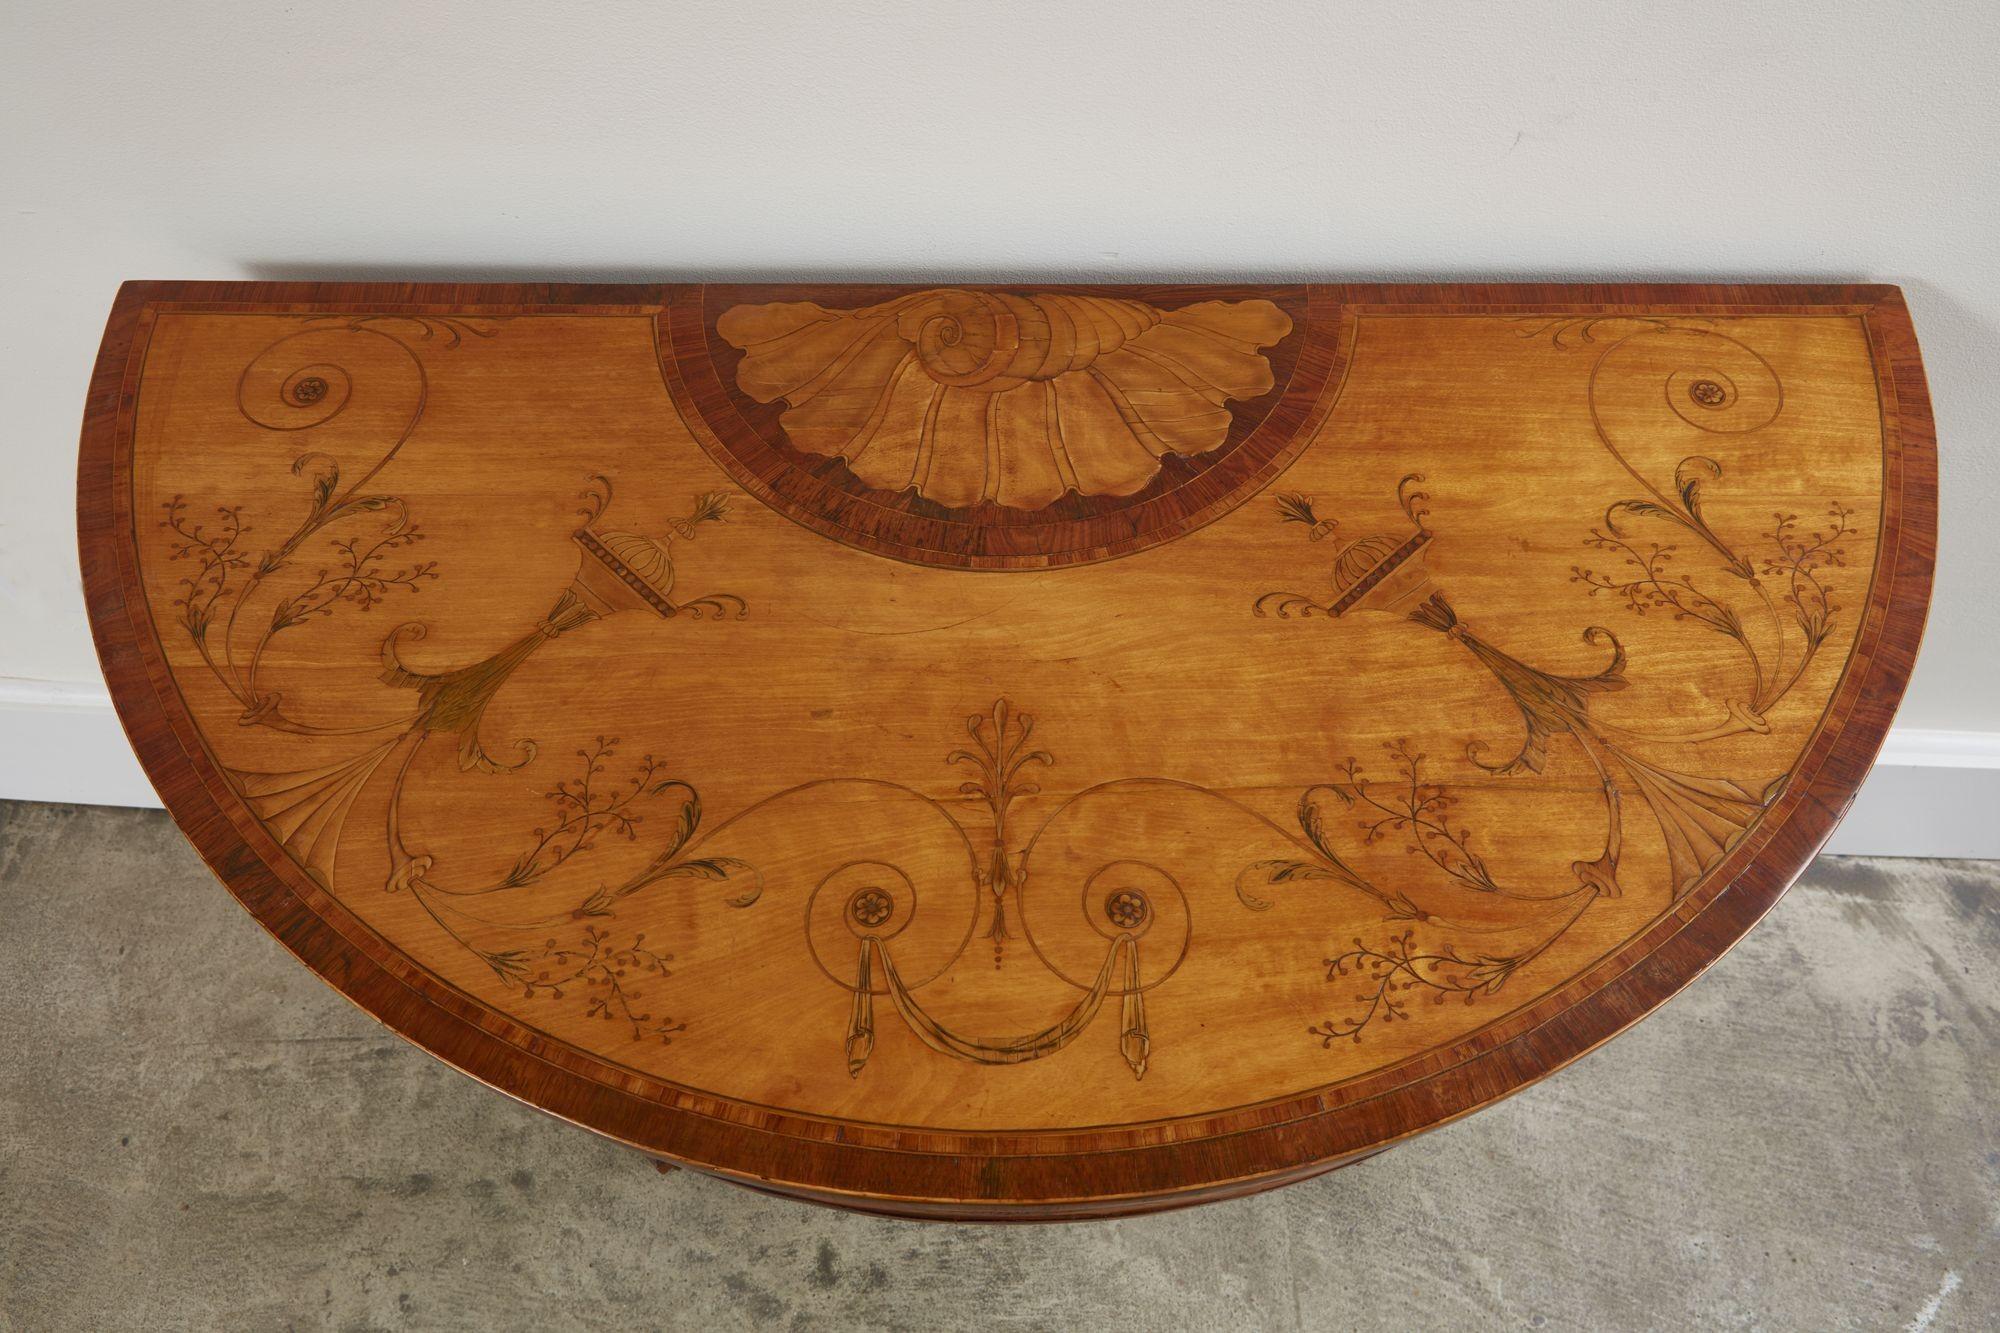 Very fine George III inlaid satinwood card table attributed to Mayhew and Ince, the top profusely inlaid with central shell, urns, swags, honeysuckle and other neoclassical motifs, the apron adorned with paterae and bellflower inlay and standing on